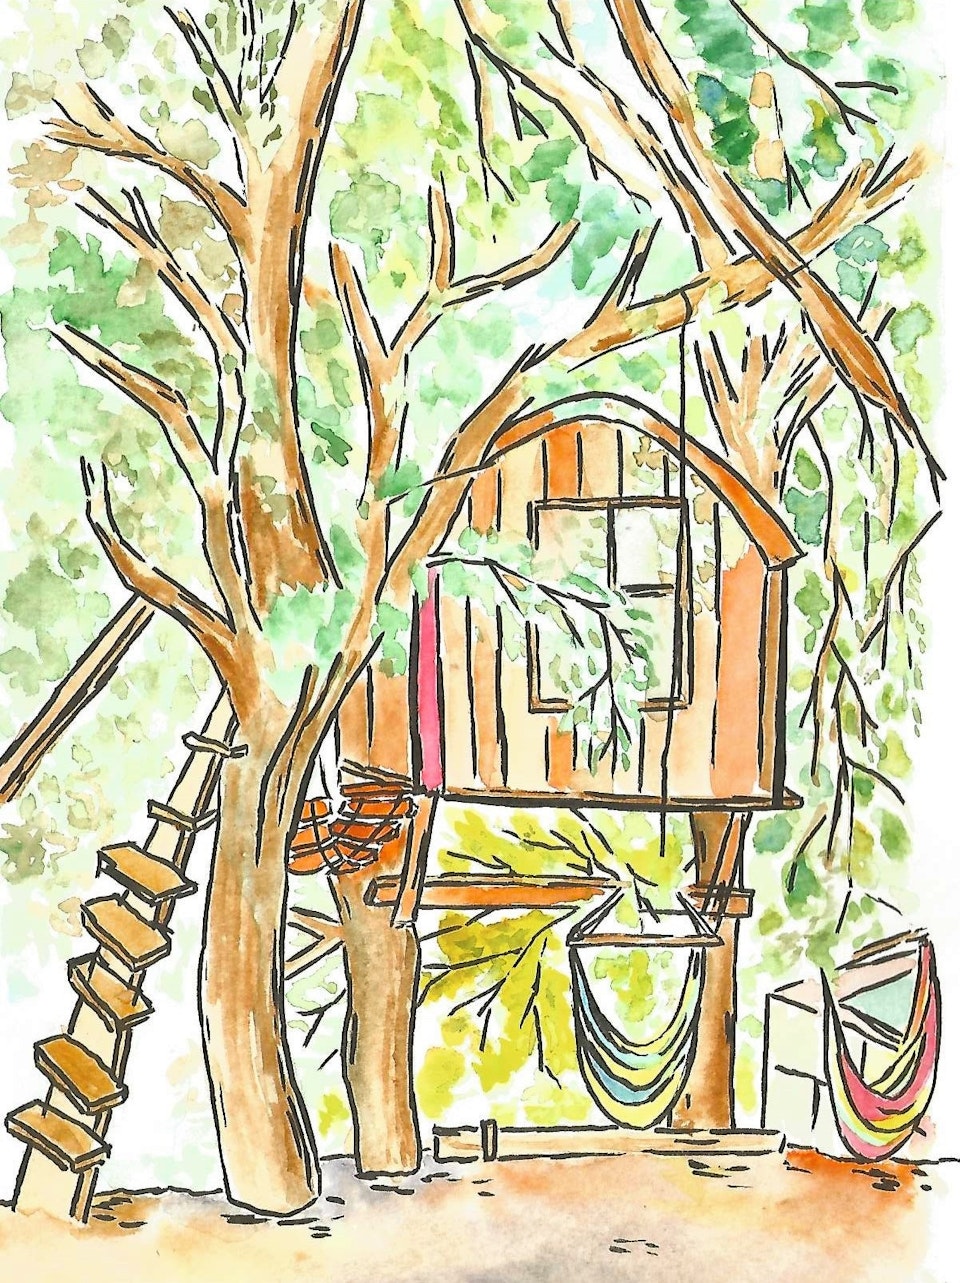 Campearte treehouse painting edited -